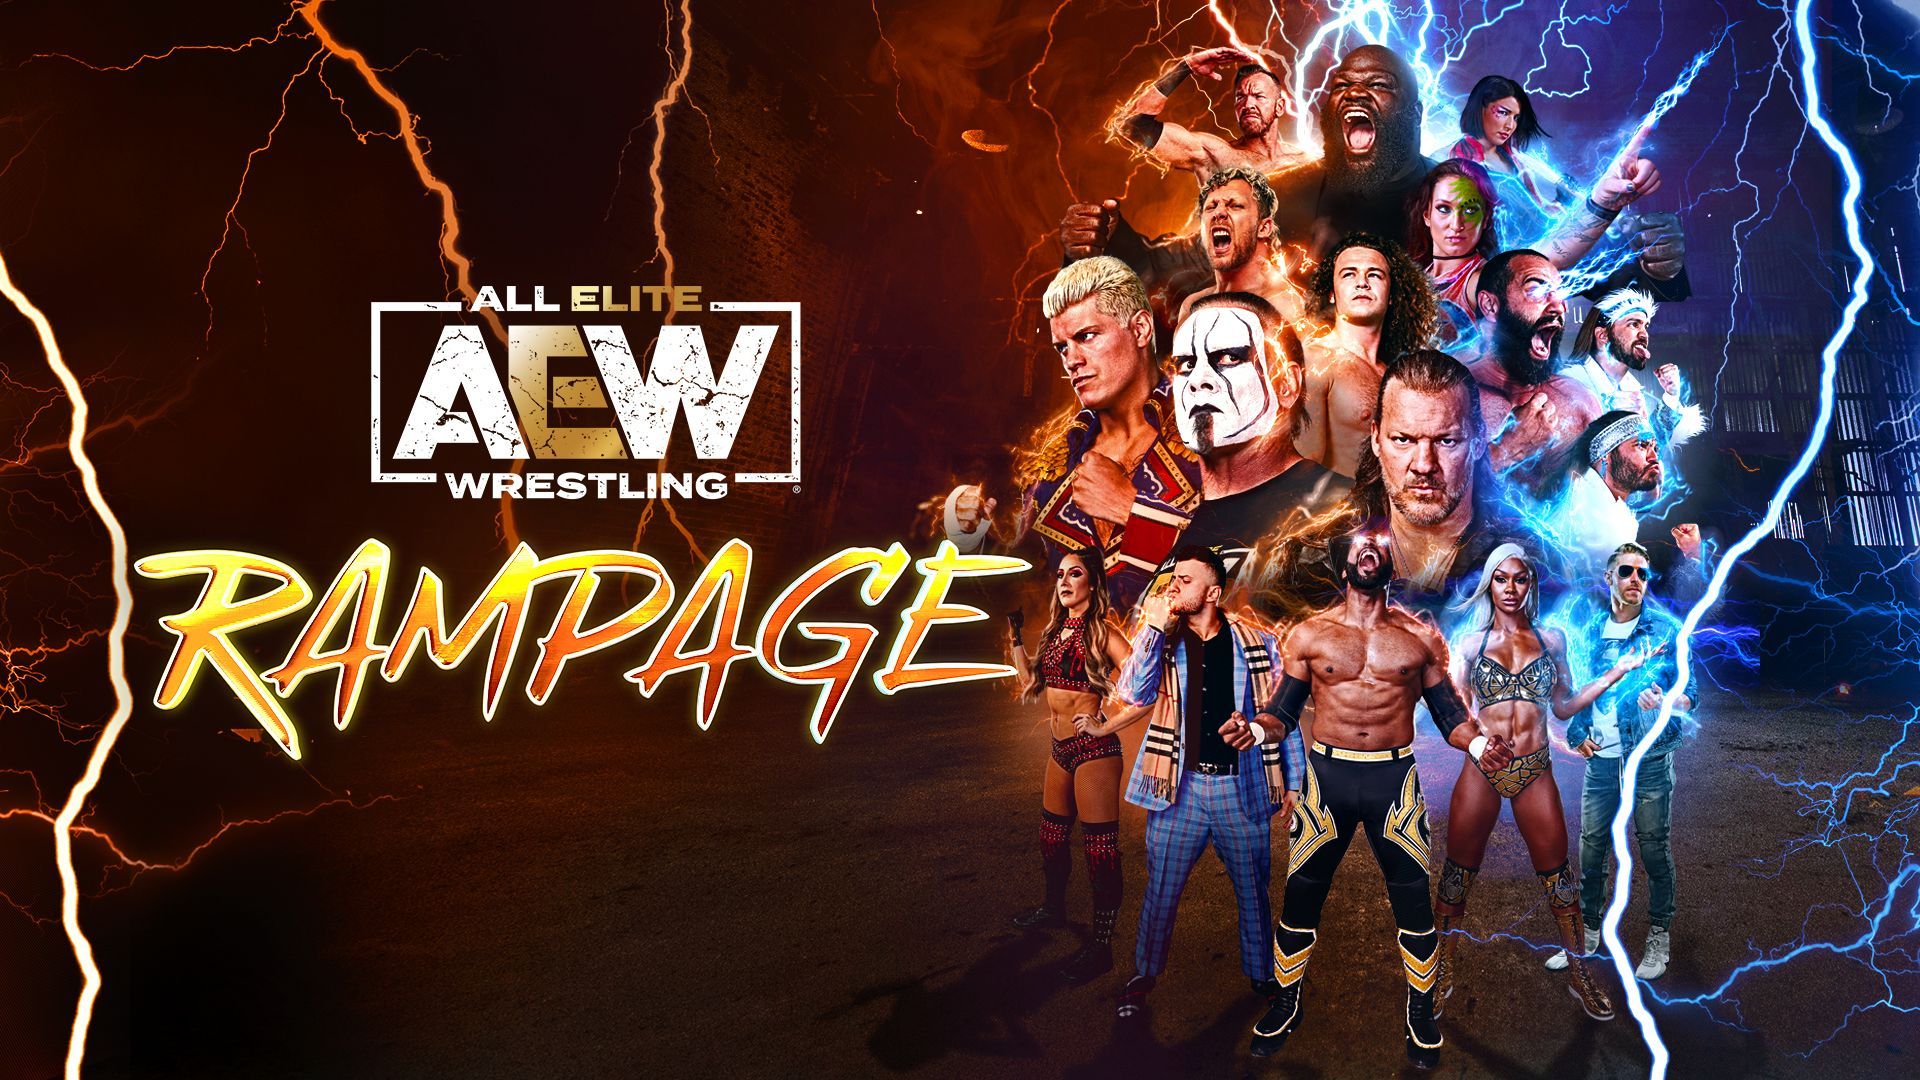 Aew Rampage Will Air Live On Fite For Uk Fans